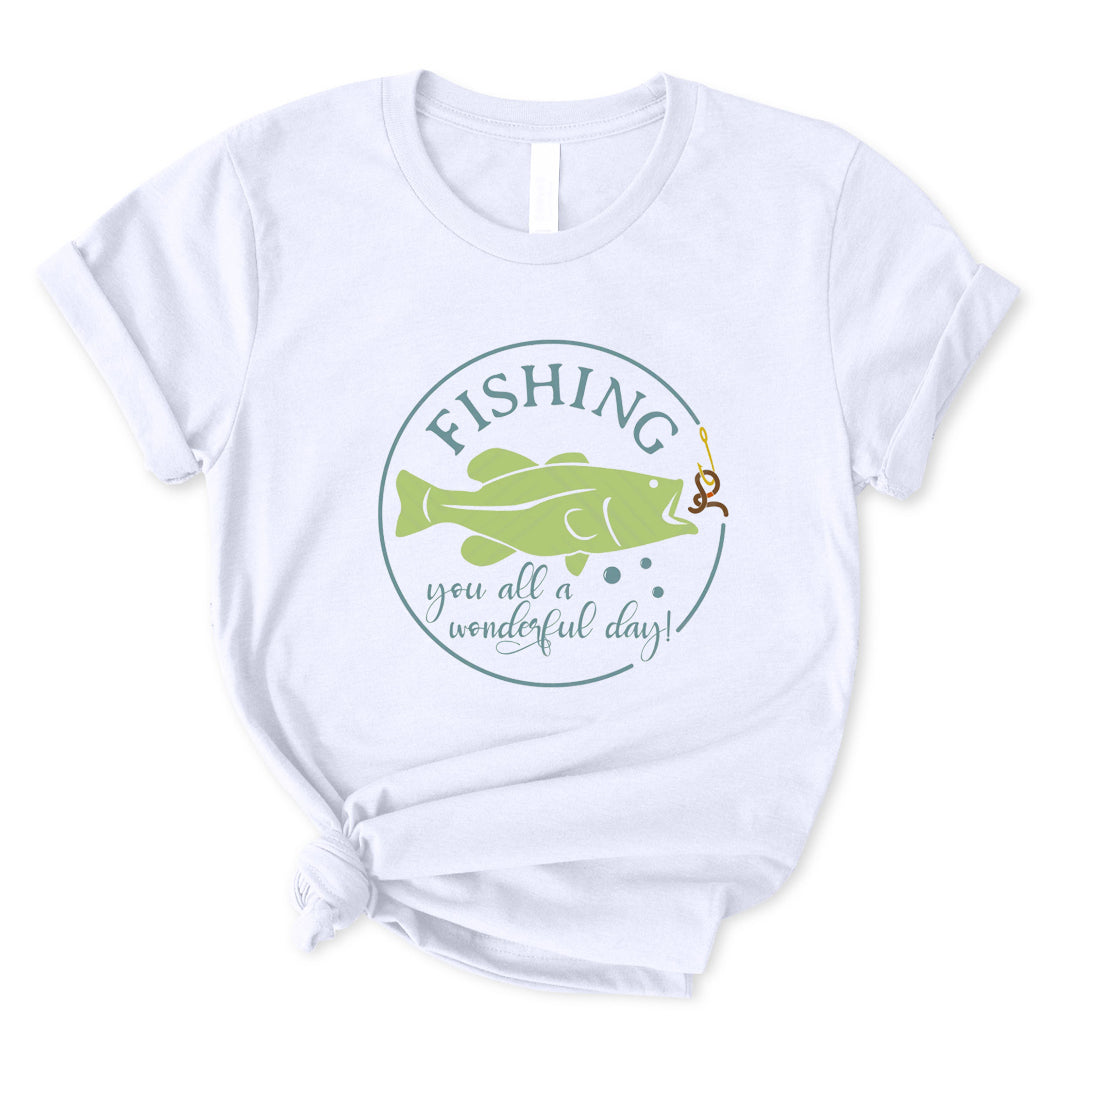 Fishing You All A Wonderful Day T-Shirt for Women